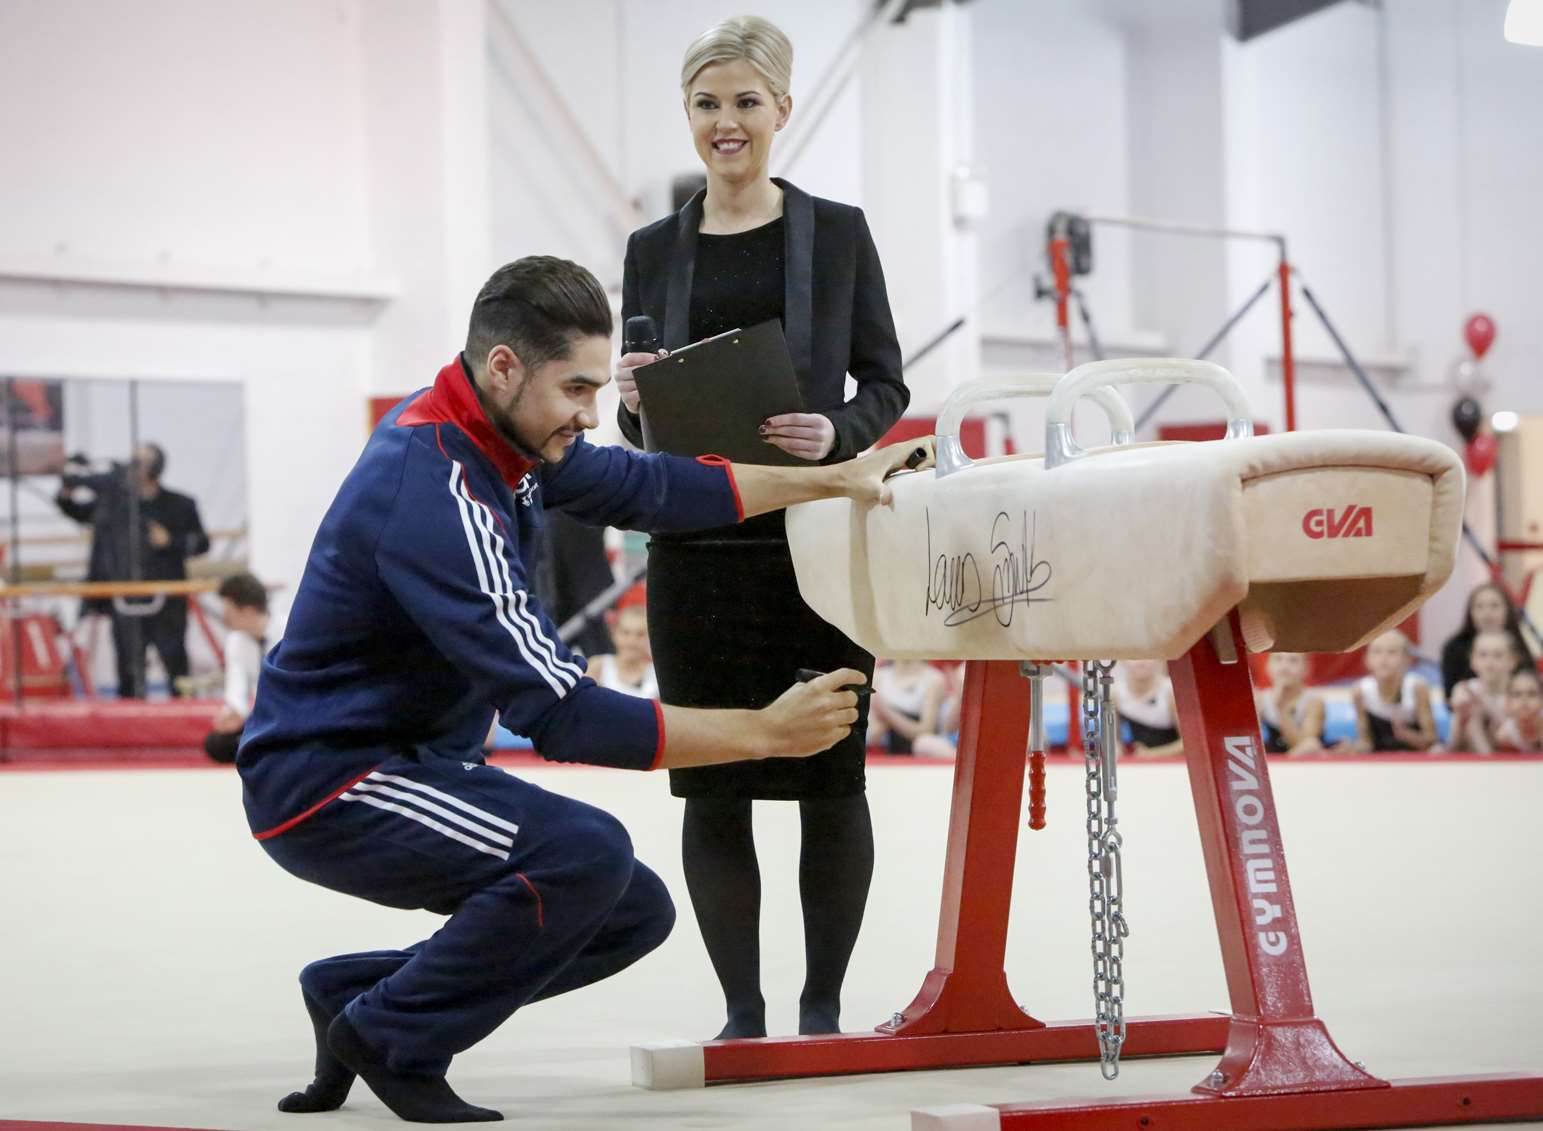 Louis Smith signs the pommel horse on which he won silver at the European Championships in Glasgow watched by Chantelle Harman, NDGA Operations Manager